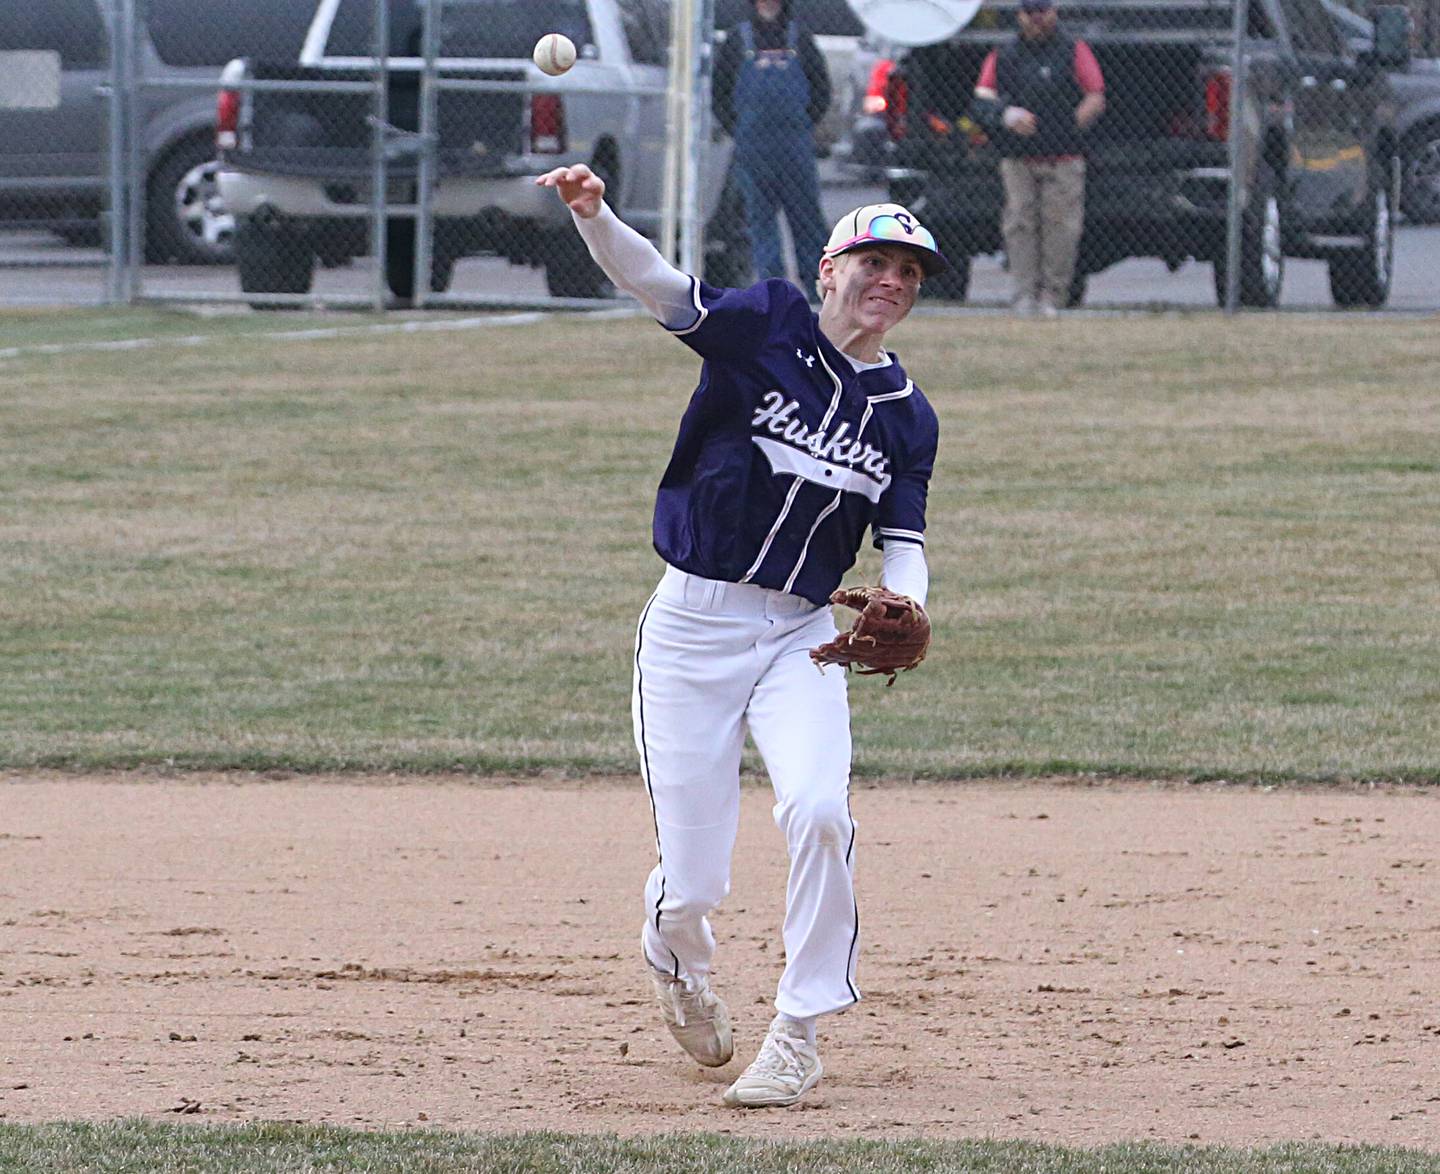 Serena shortstop Tanner Faivre throws to first base to force out an Ottawa runner during a game last season at Ottawa High School.